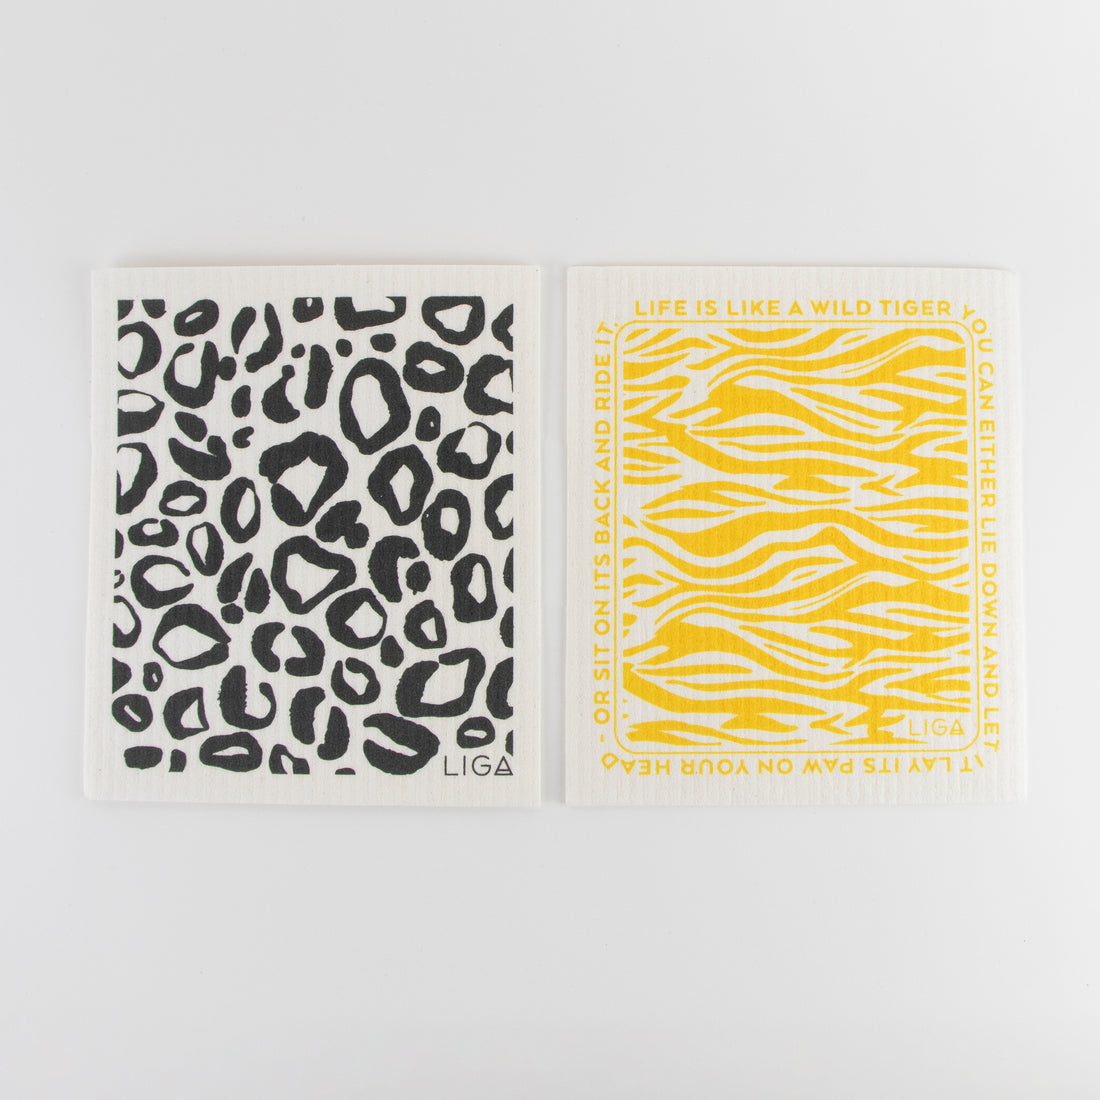 100% compostable dishcloths. Leopard and tiger print